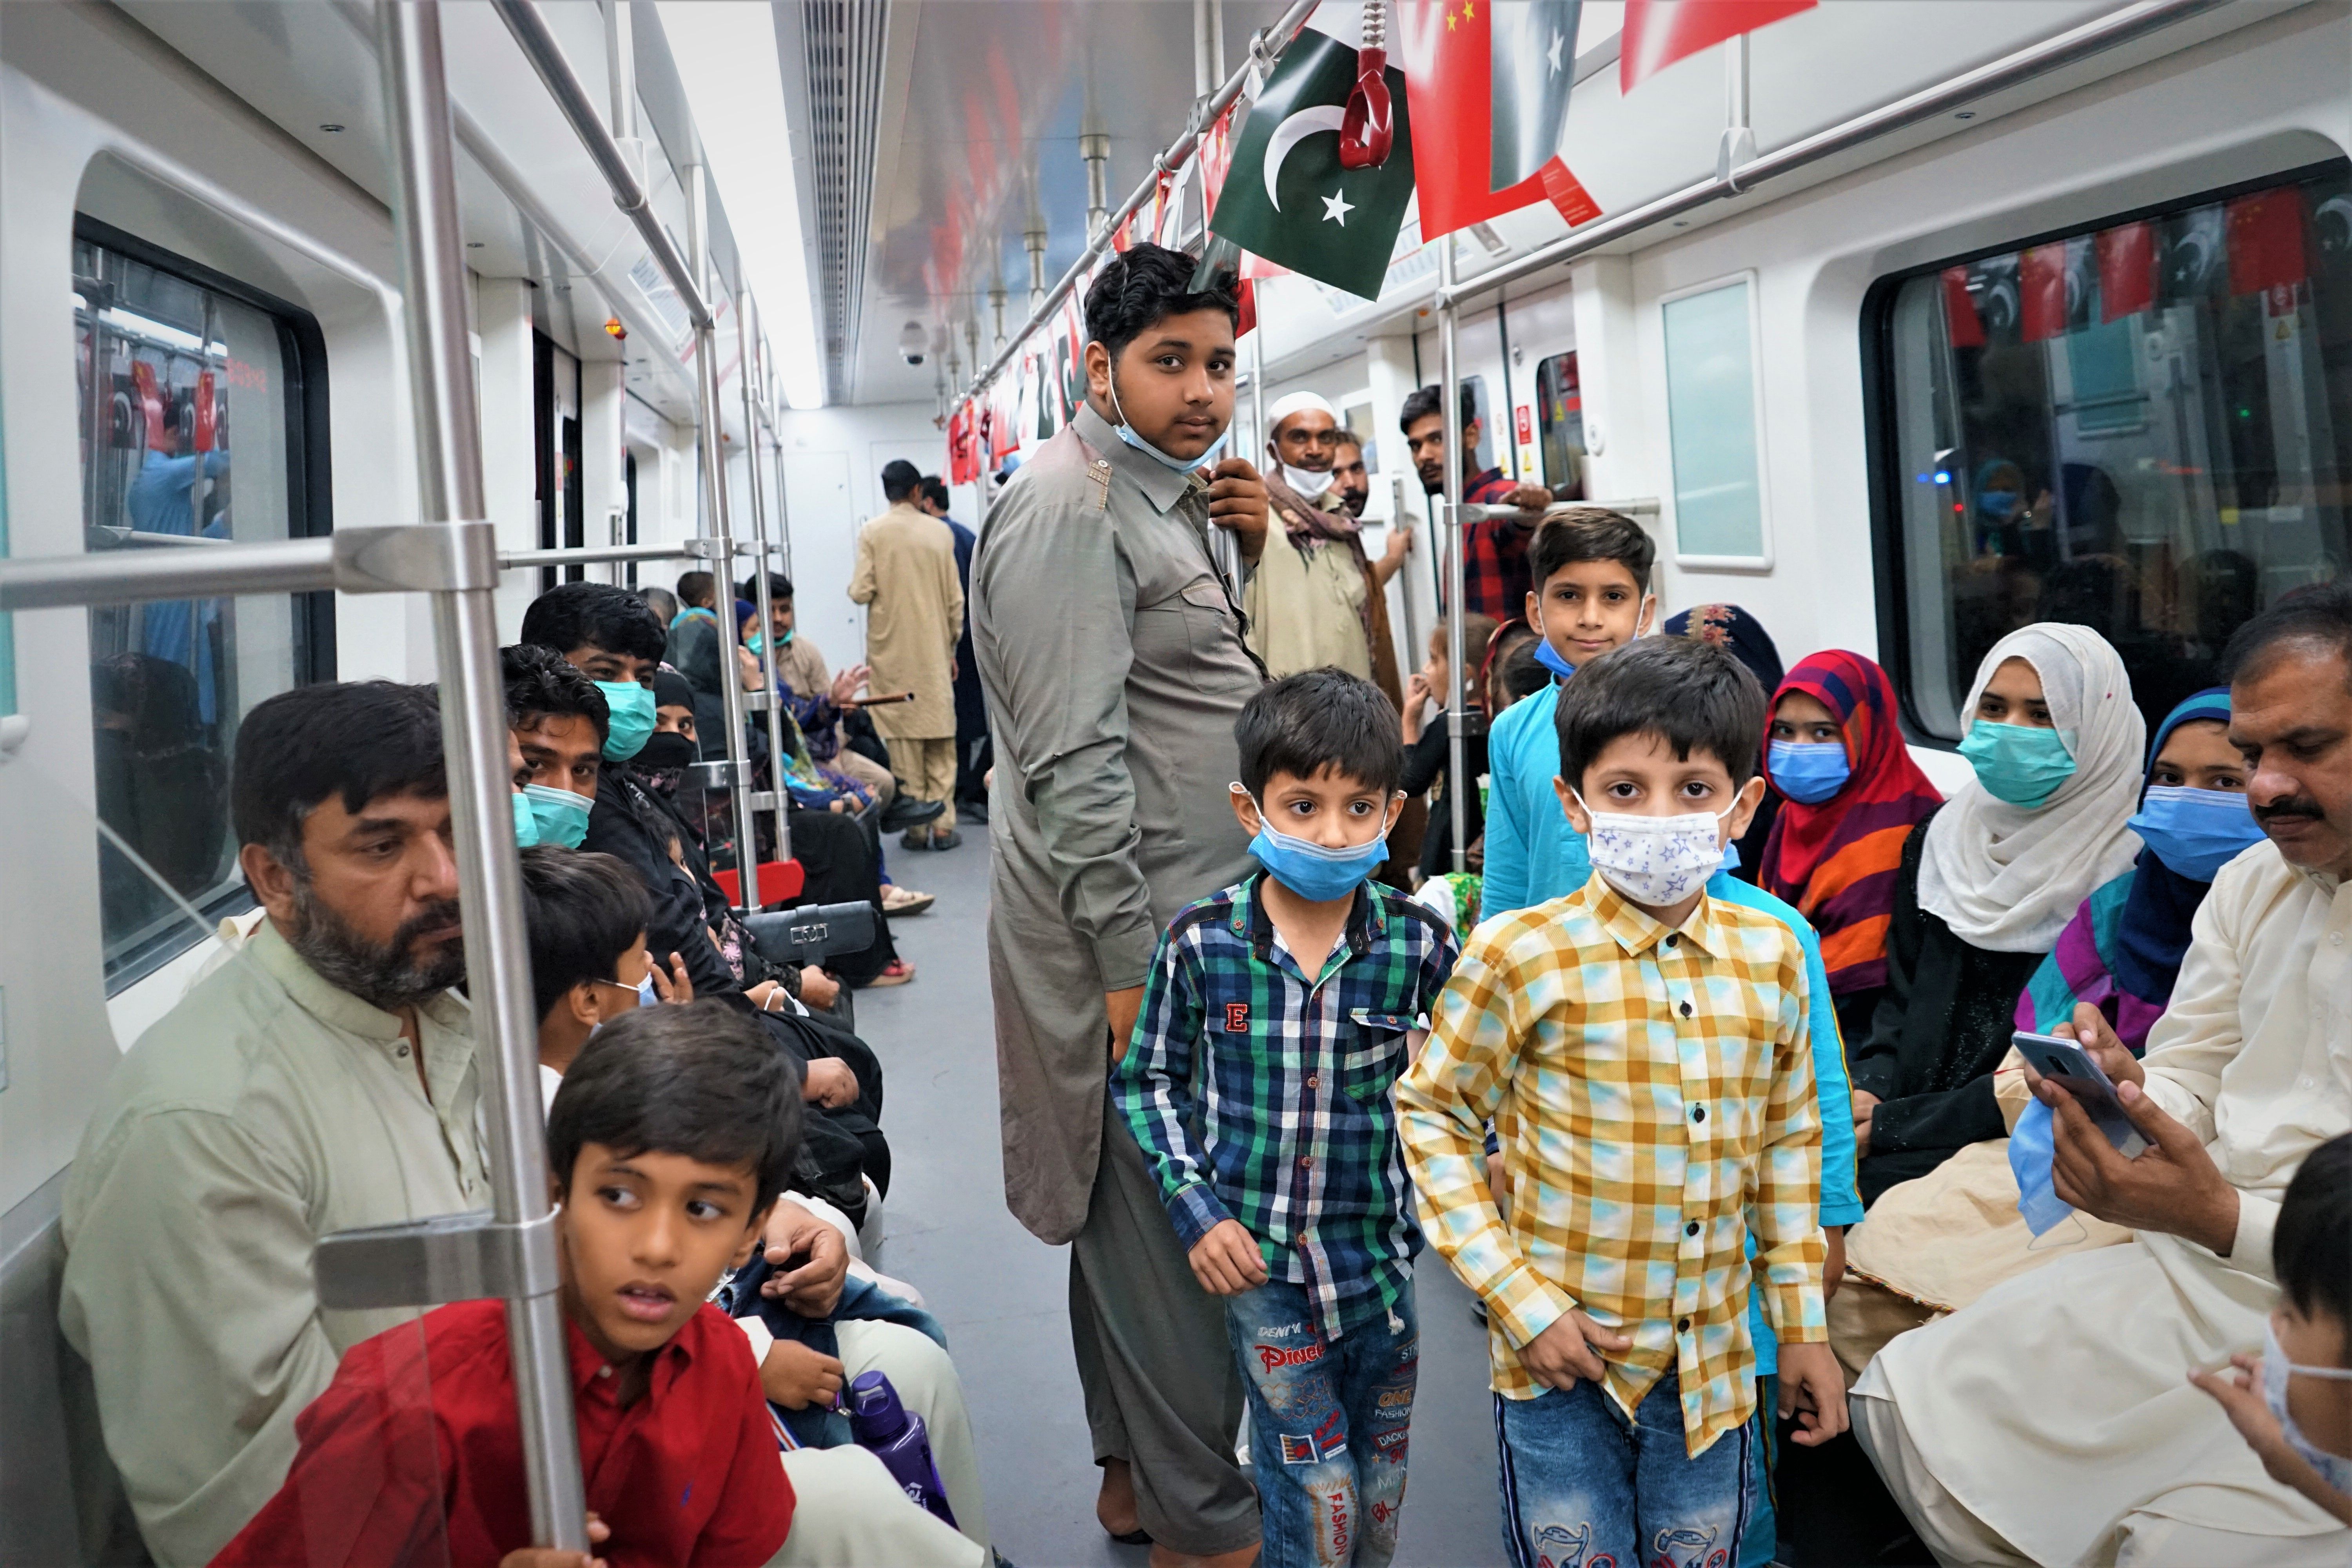 Lahoris riding the Orange Line for the first time. The railway will improve the lives of many in the city. Image by Sabrina Toppa. Pakistan, 2020.